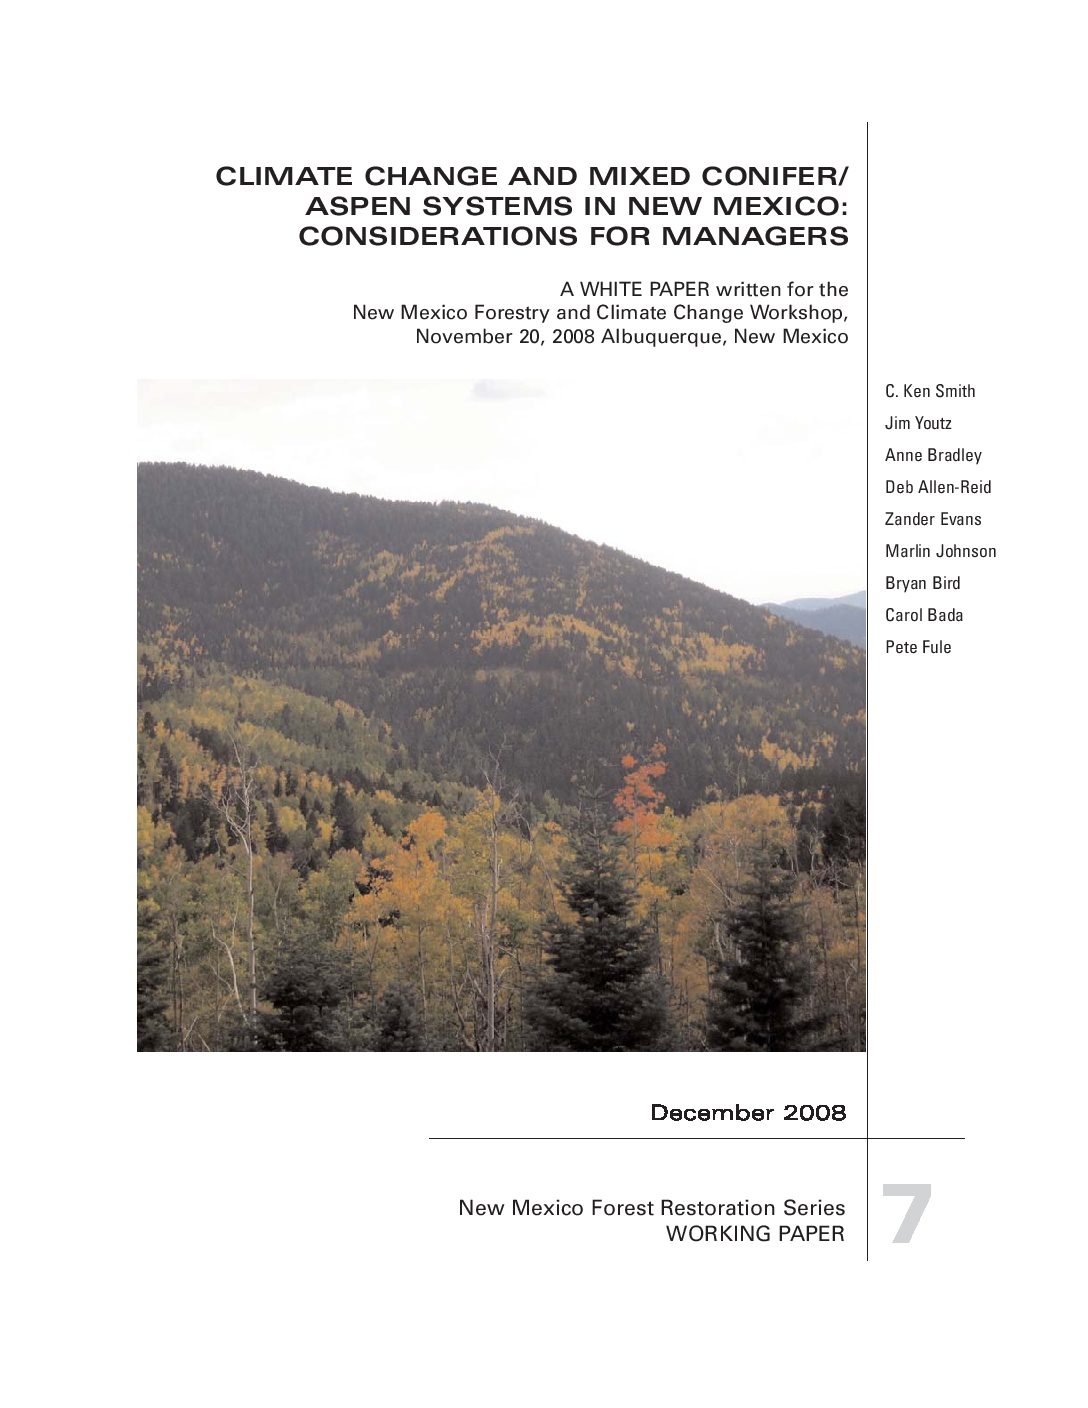 Climate Change and Mixed Conifer/Aspen Systems in New Mexico: Considerations for Managers